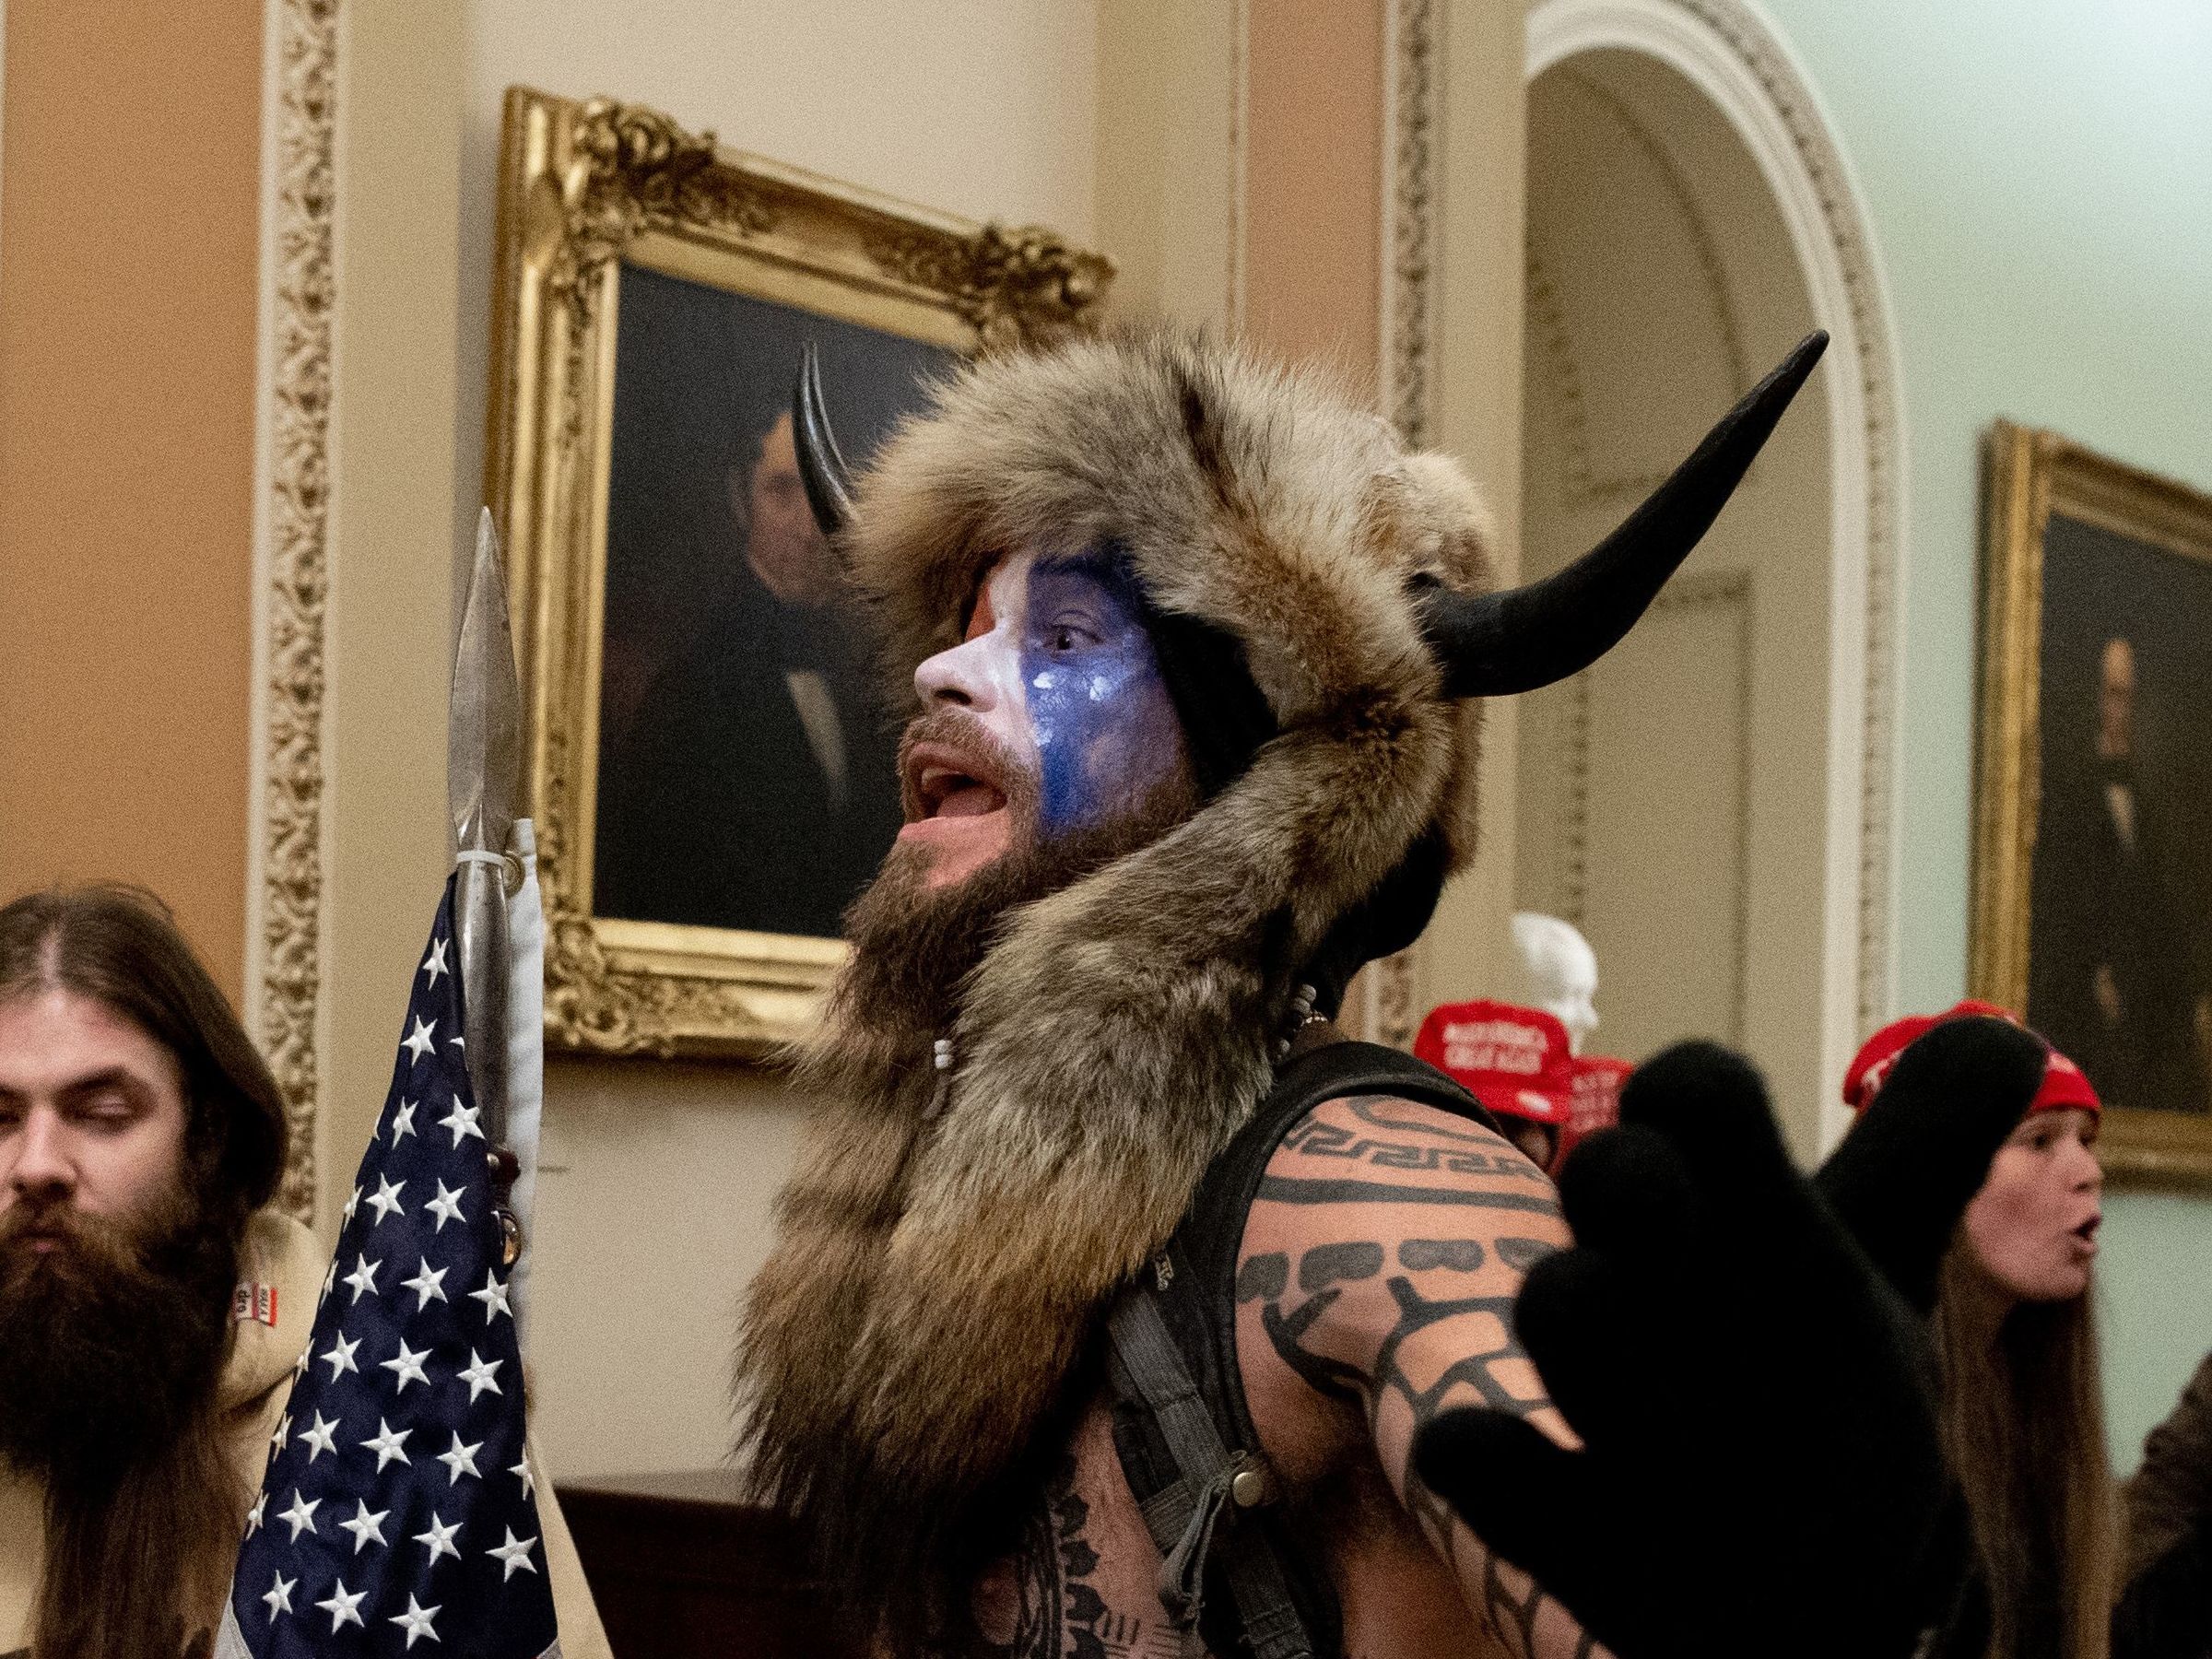 qanon-shaman-arrested-for-his-role-at-wednesday-riot-at-u-s-capitol